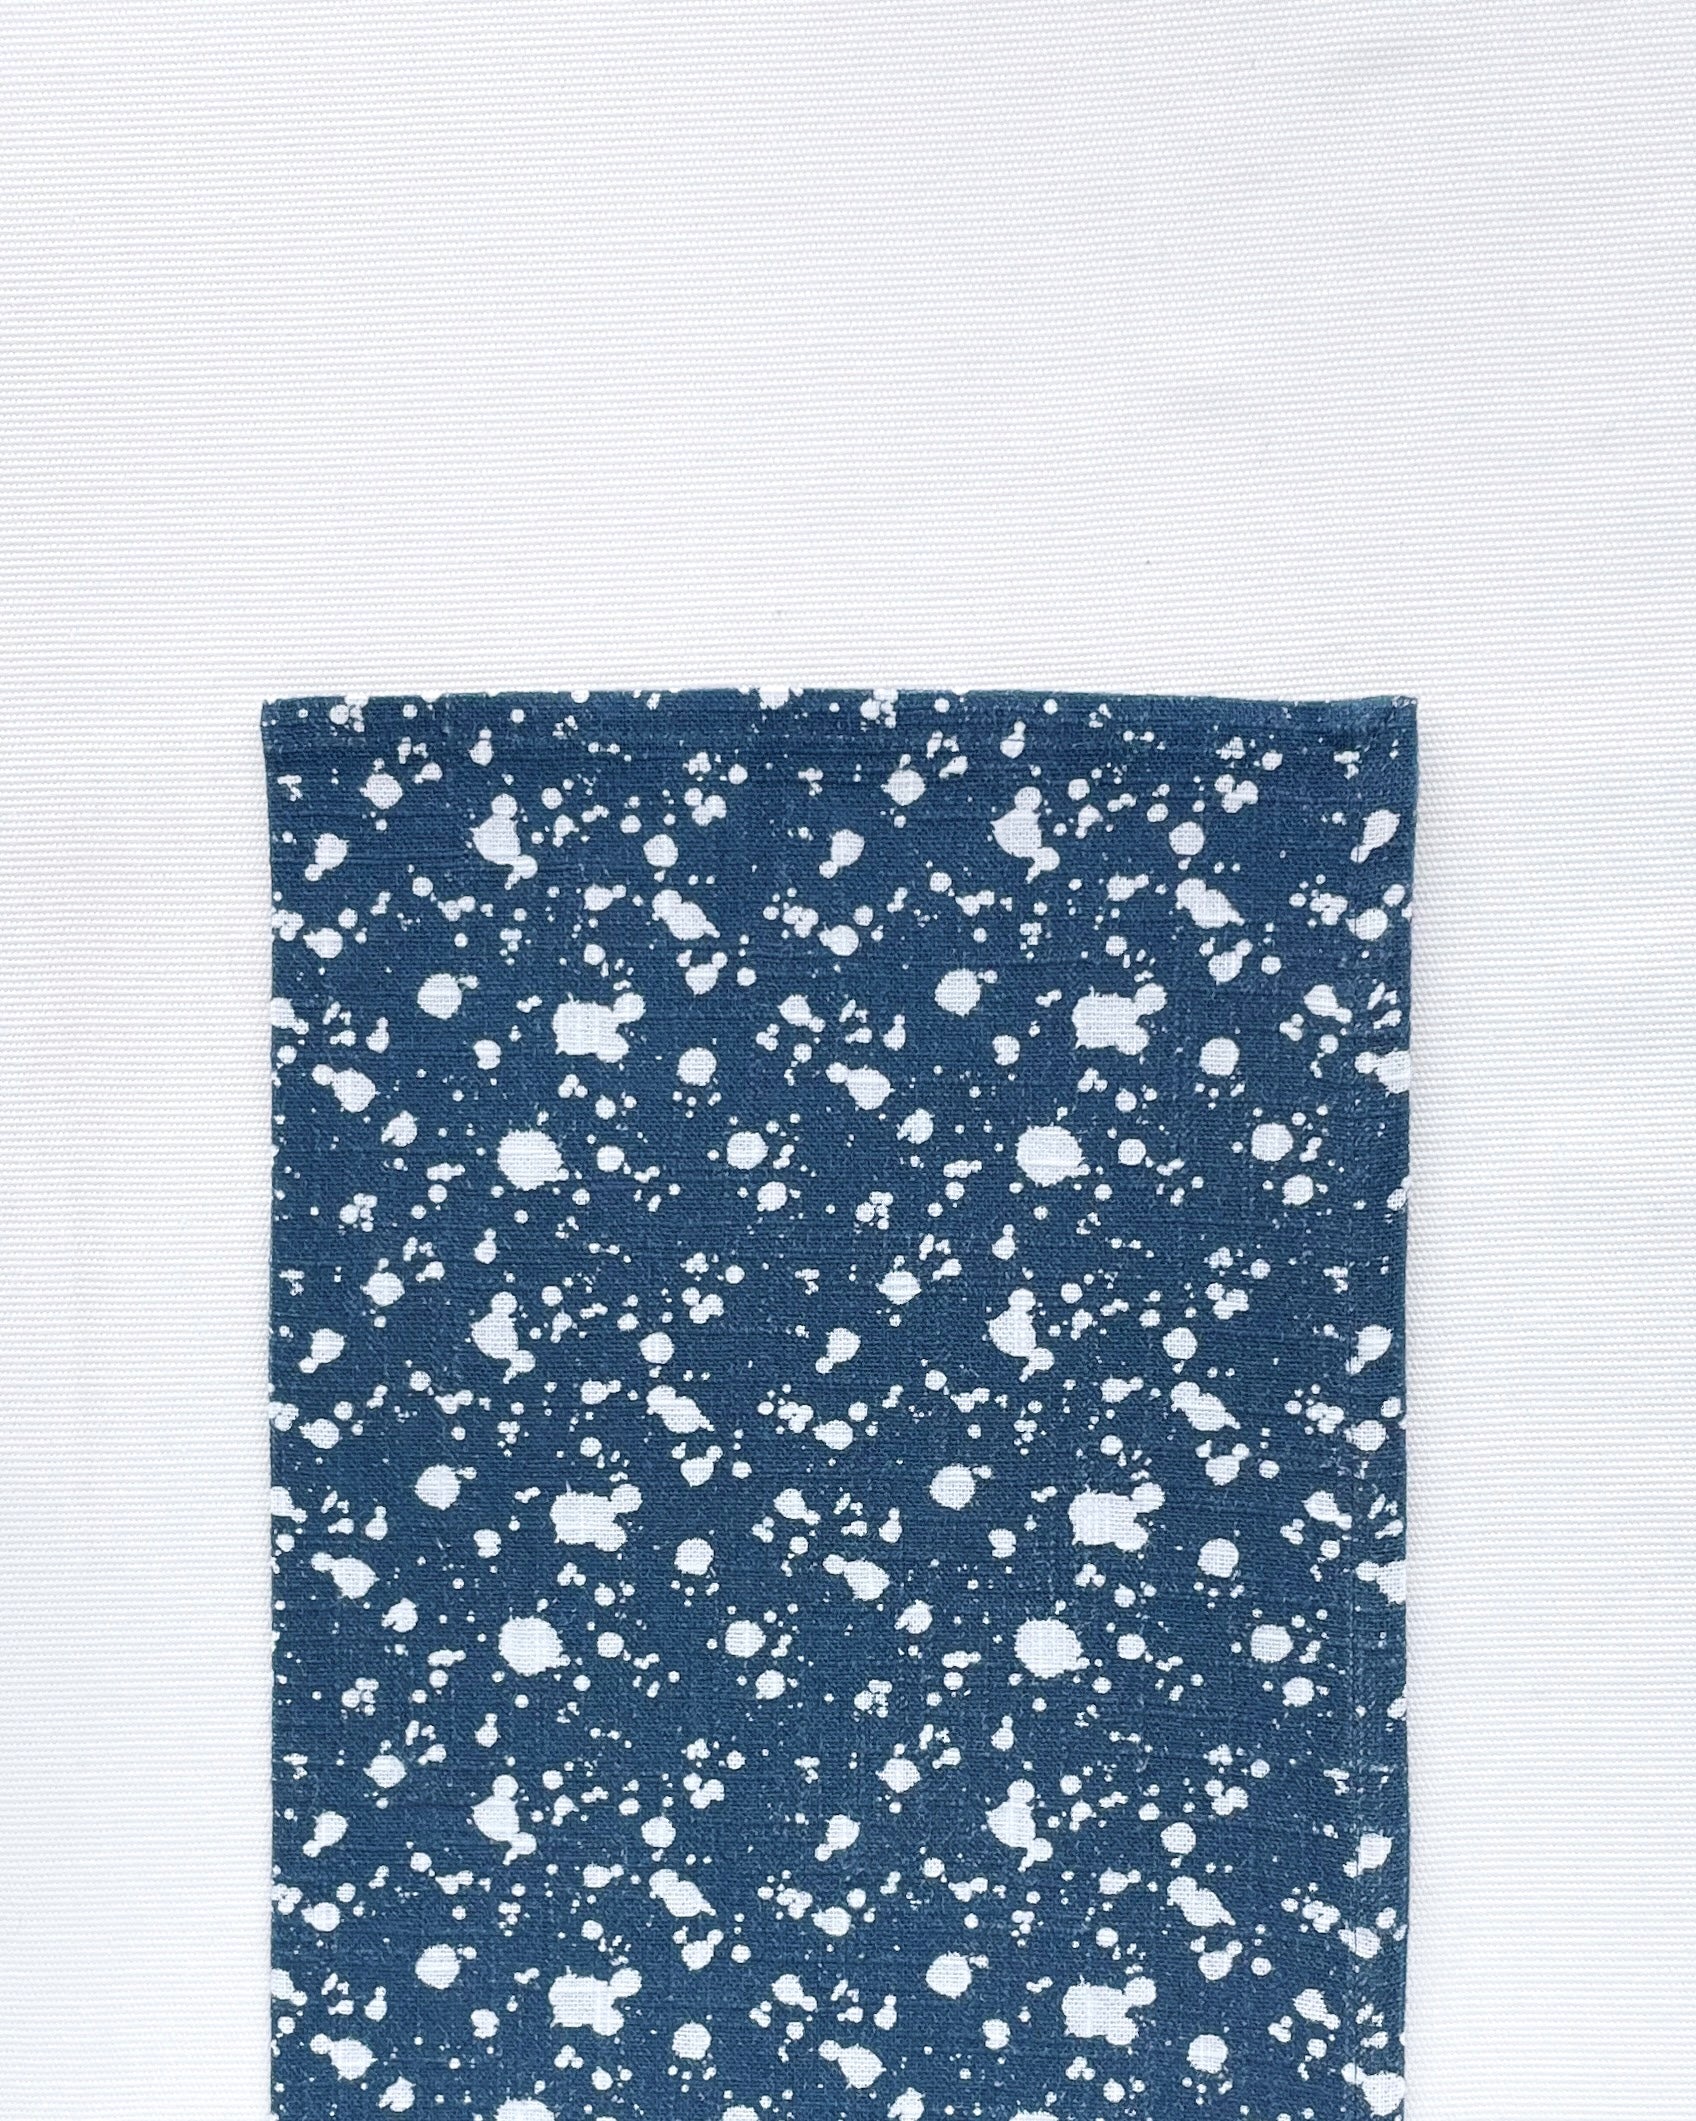 Flat lay of Splatter Denim Napkin folded in half on a white background.  Napkin is navy blue with white spots splattered all over it.